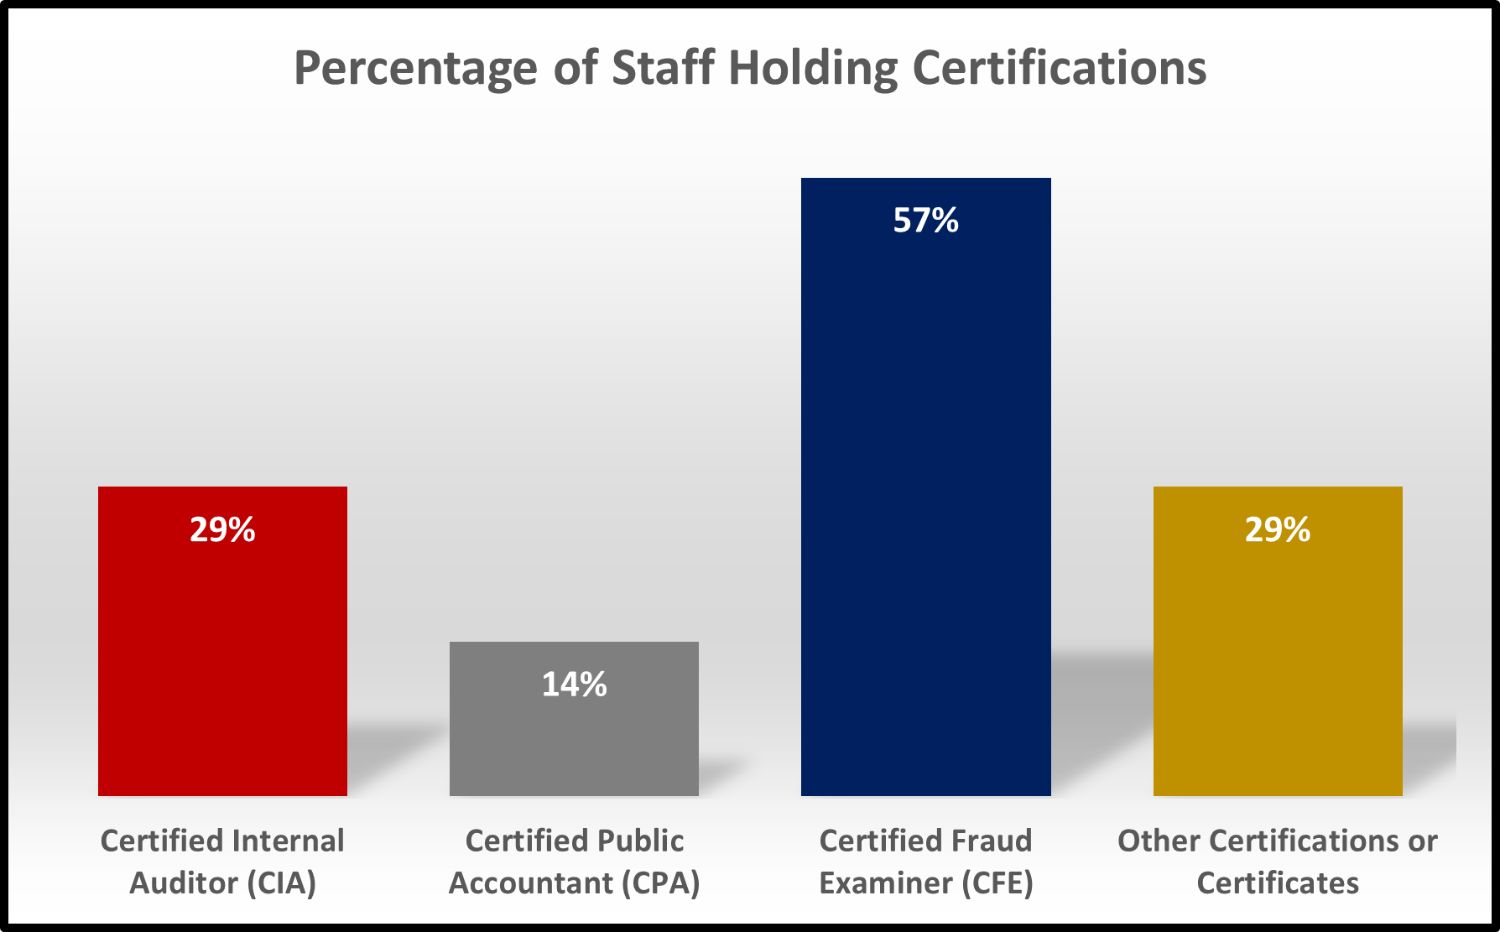 Percentage of staff holding certifications graph showing 20% of staff certified as internal auditors (CIA), public accountants (CPA), and internal controls auditors (CICA) and 40% of staff certified as fraud examiners (CFE).